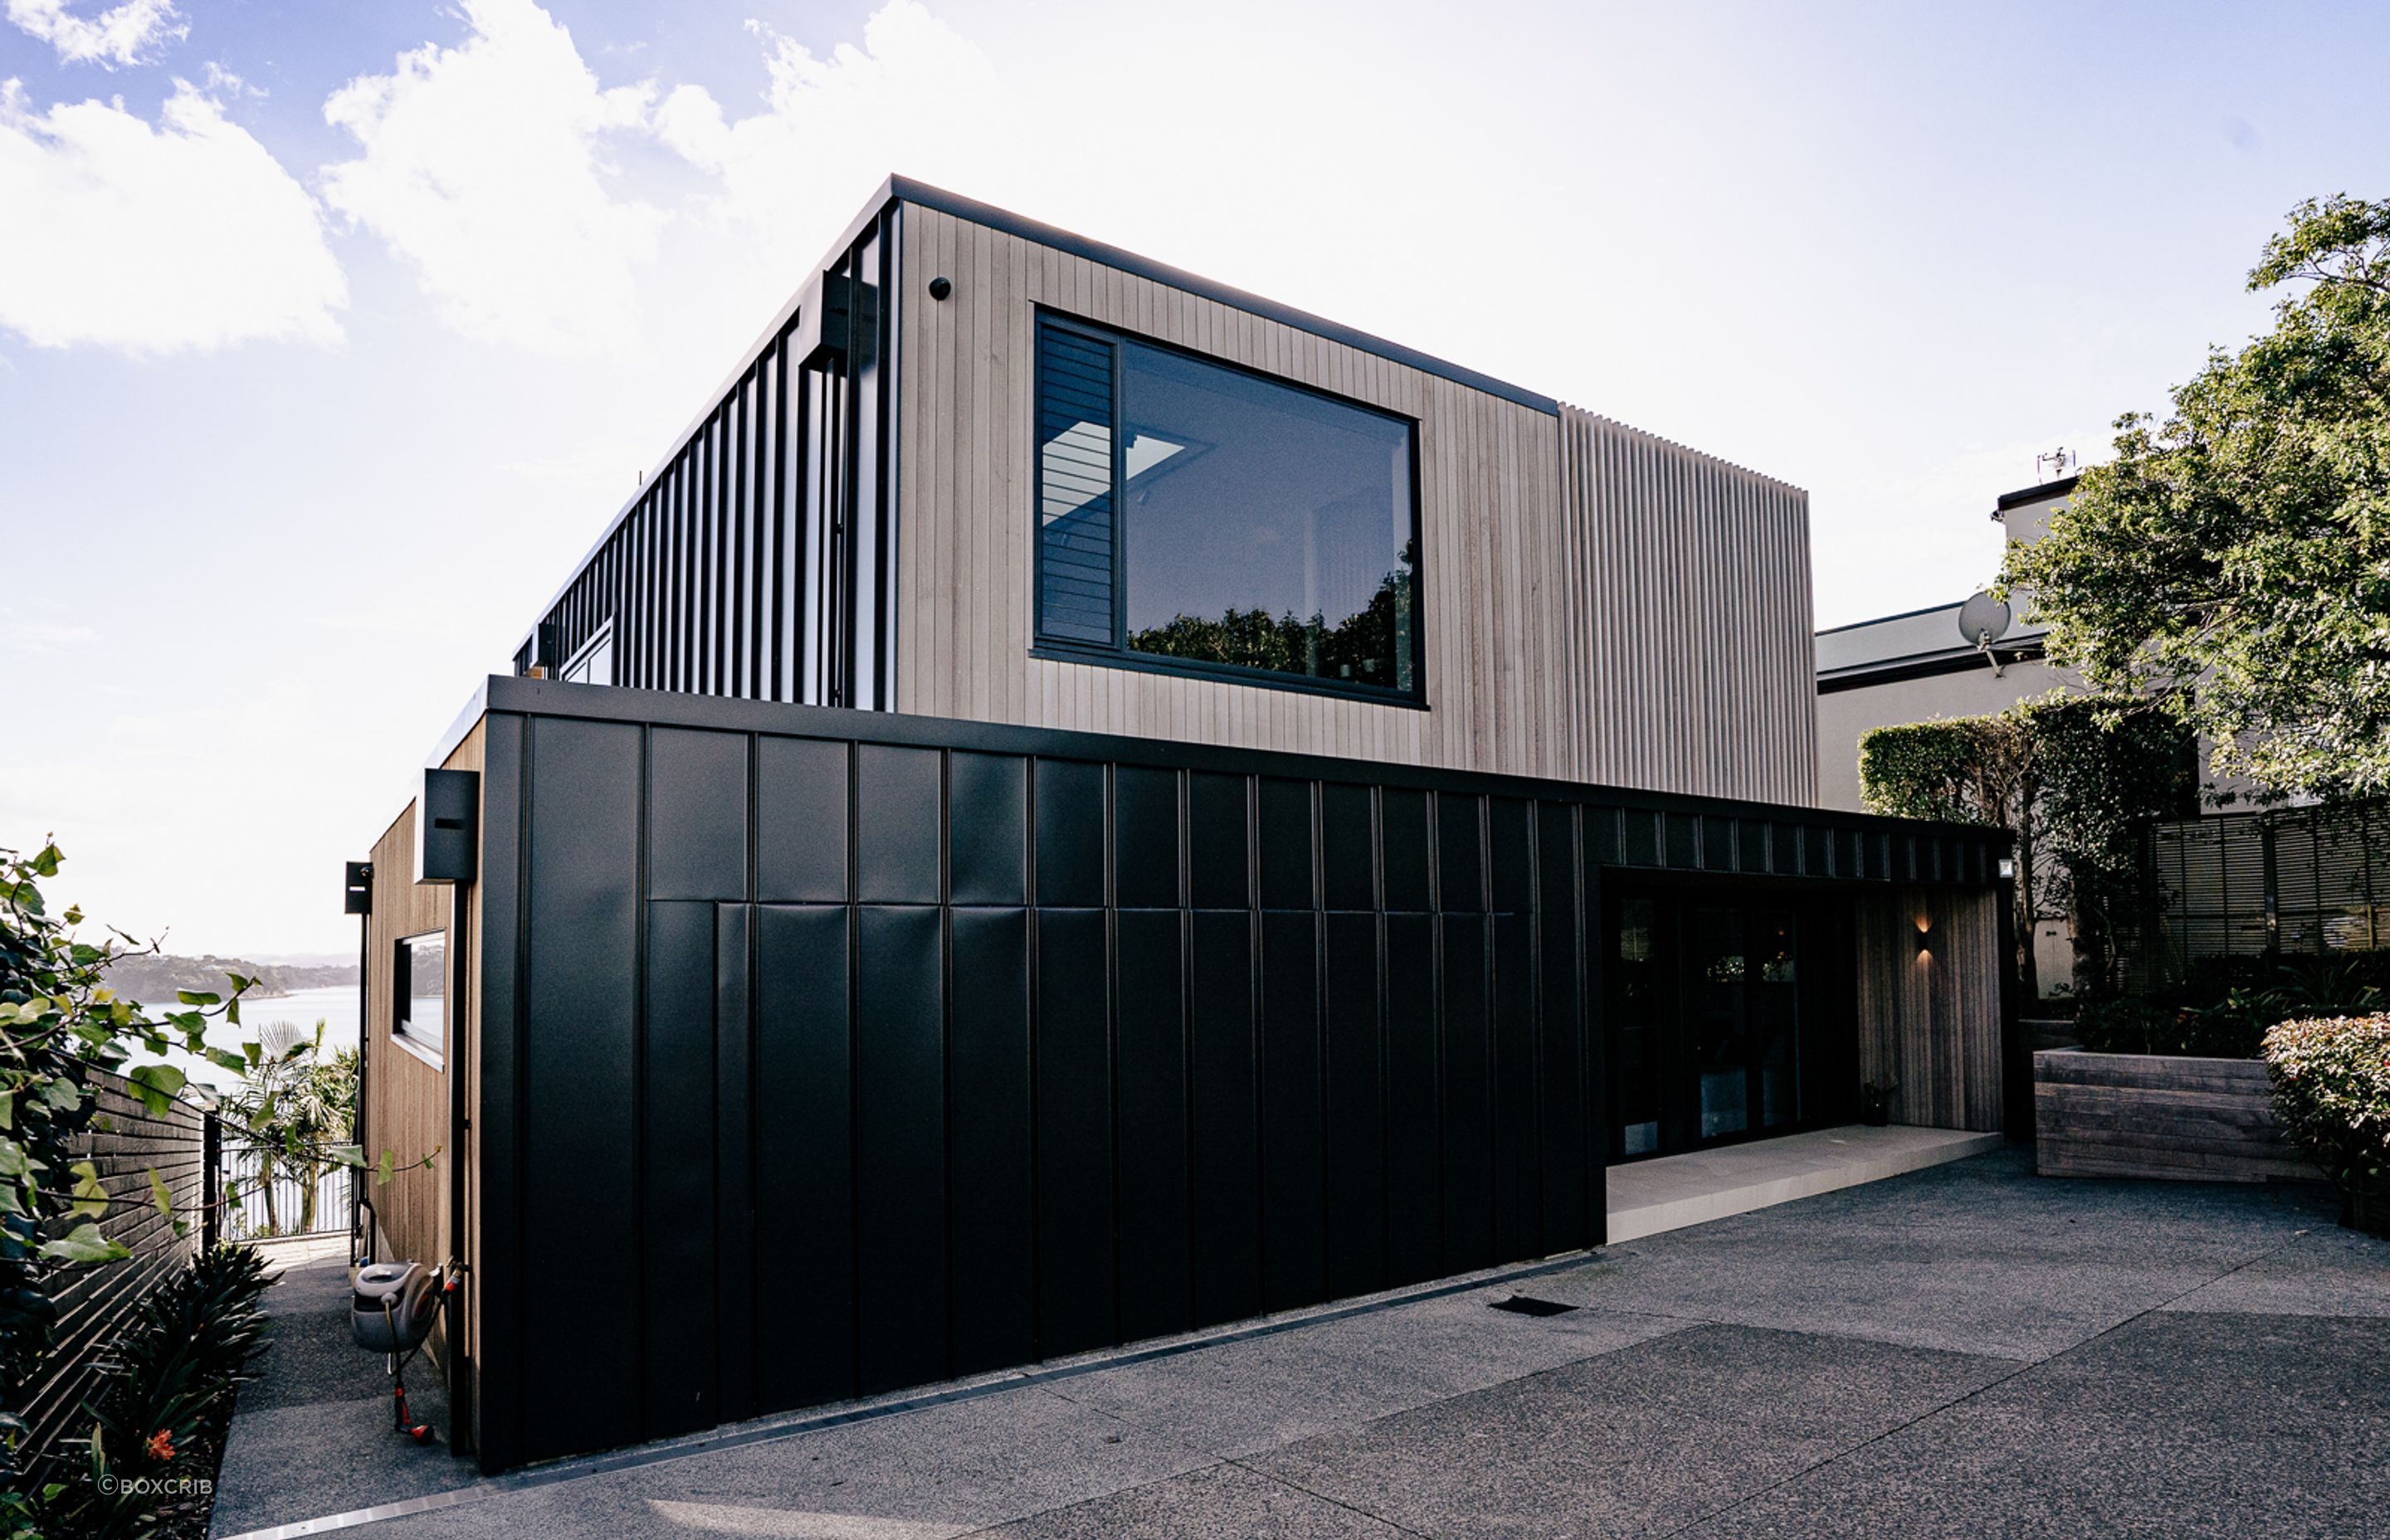 The entrance of the house showcases the two primary cladding materials used for the home.